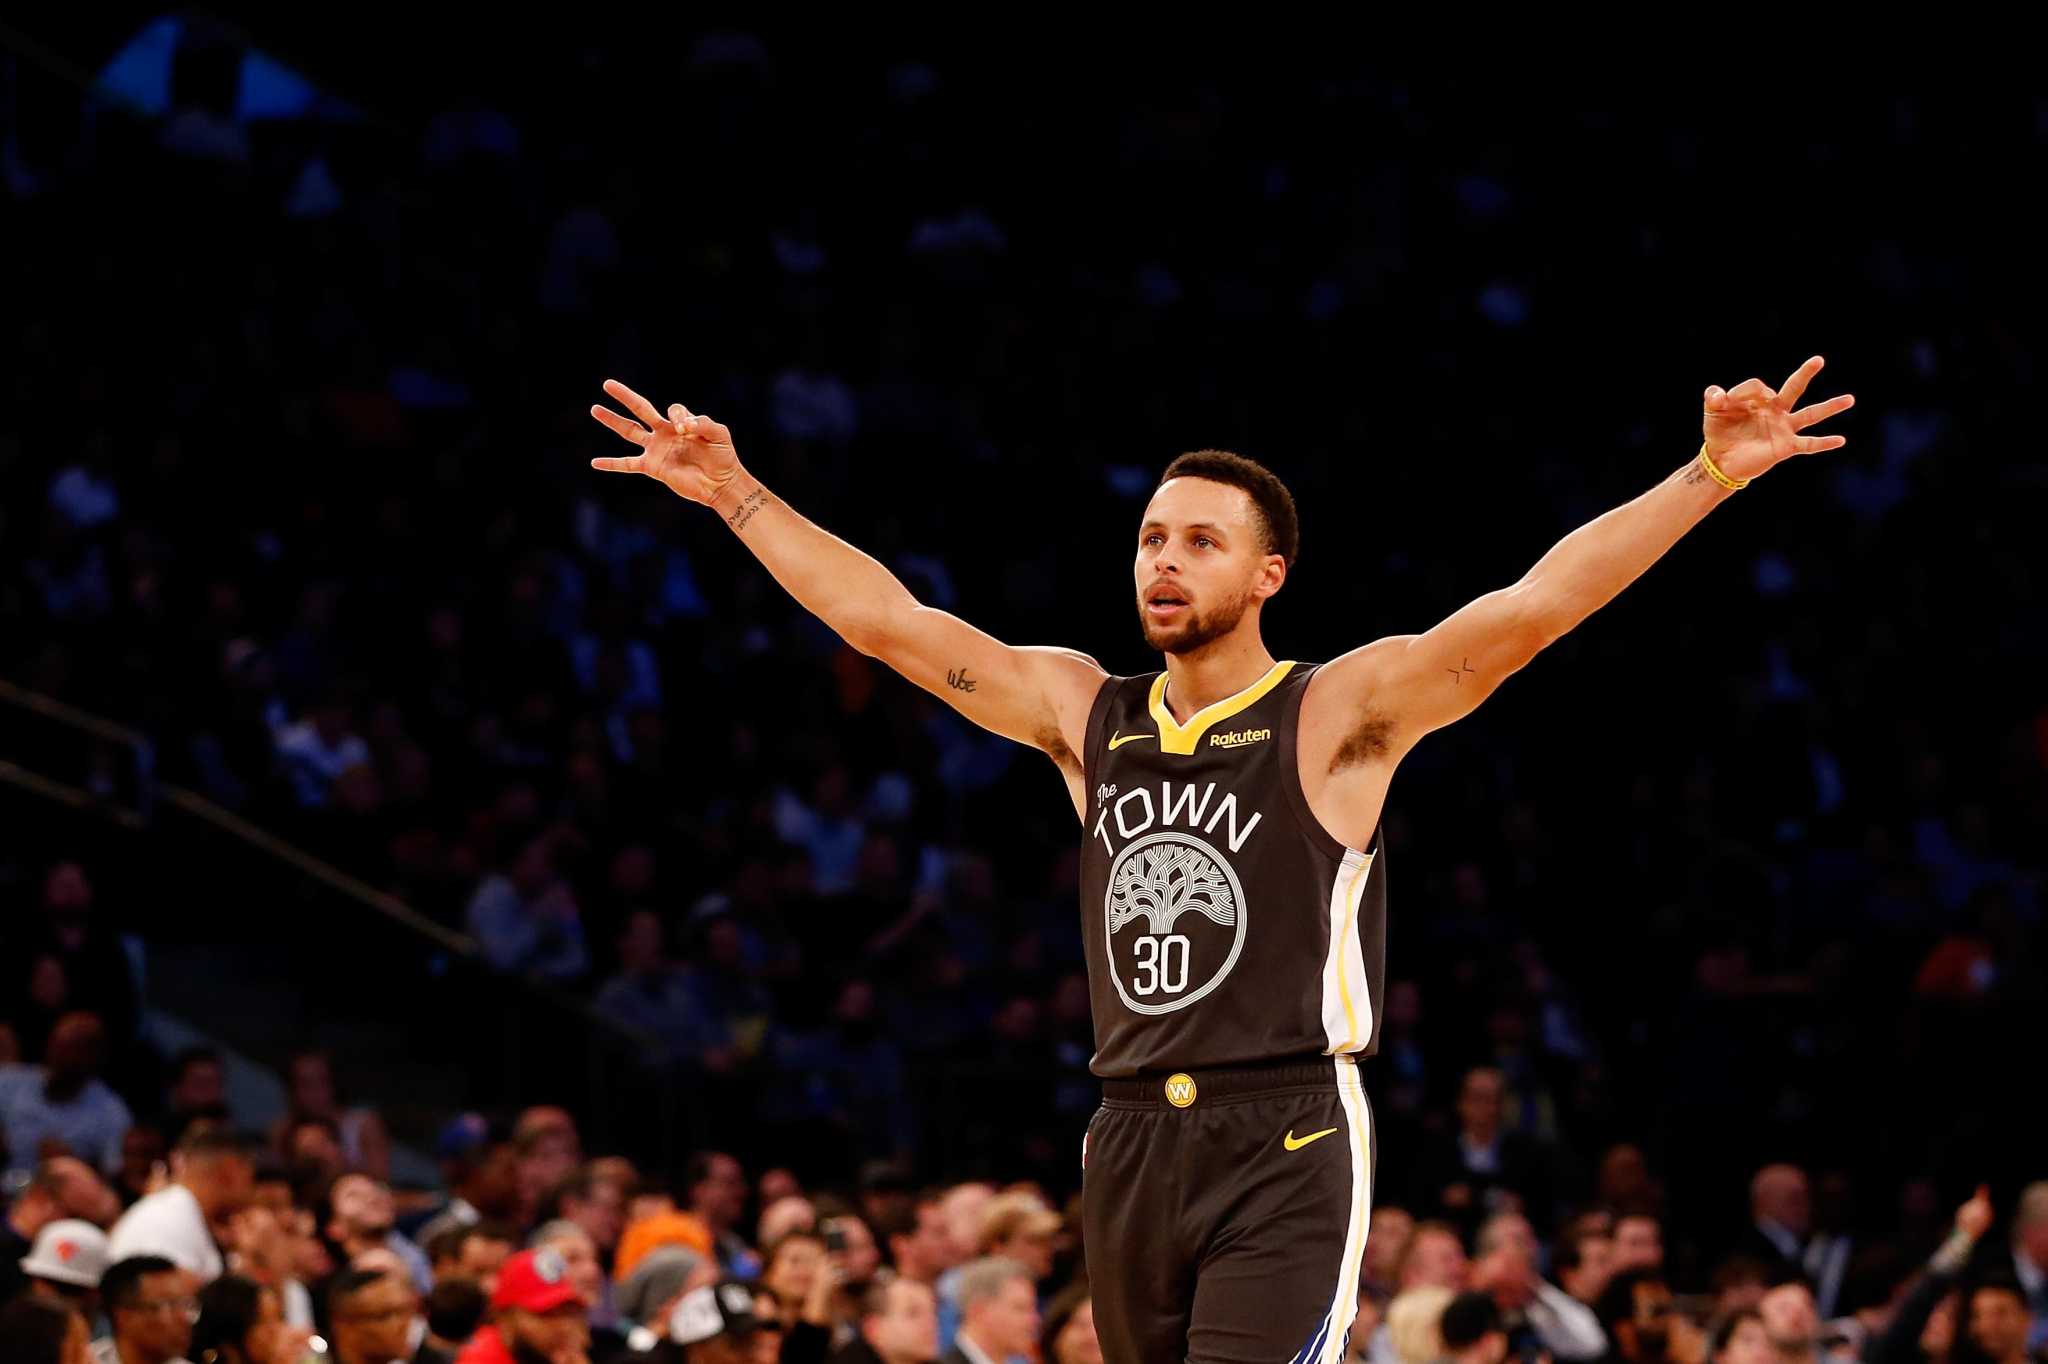 For Warriors' Stephen Curry, the 30 